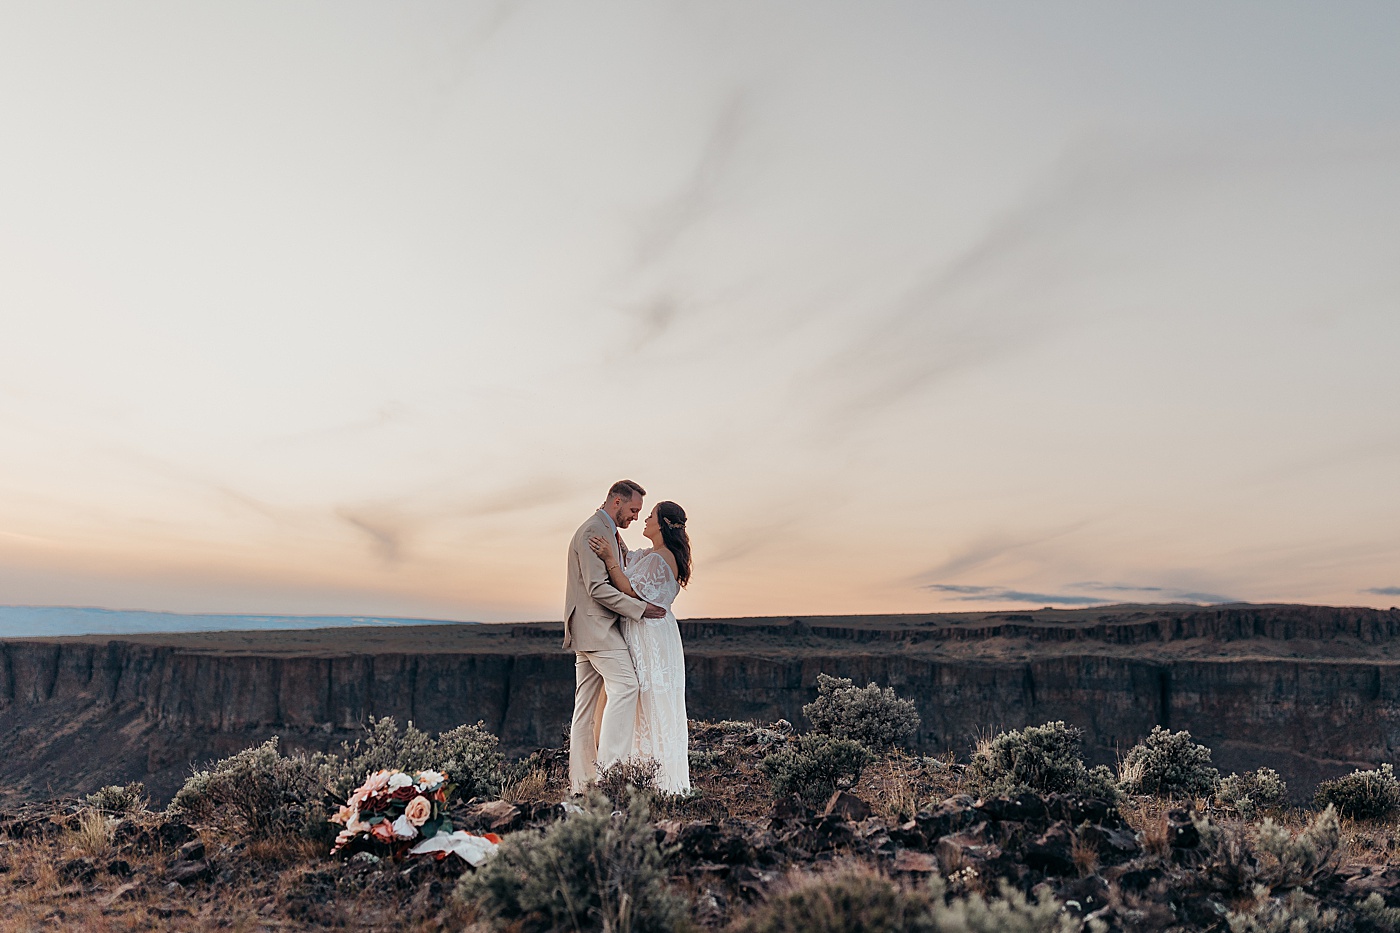 Bride and groom portraits at sunset at Vantage | Photo by Megan Montalvo Photography